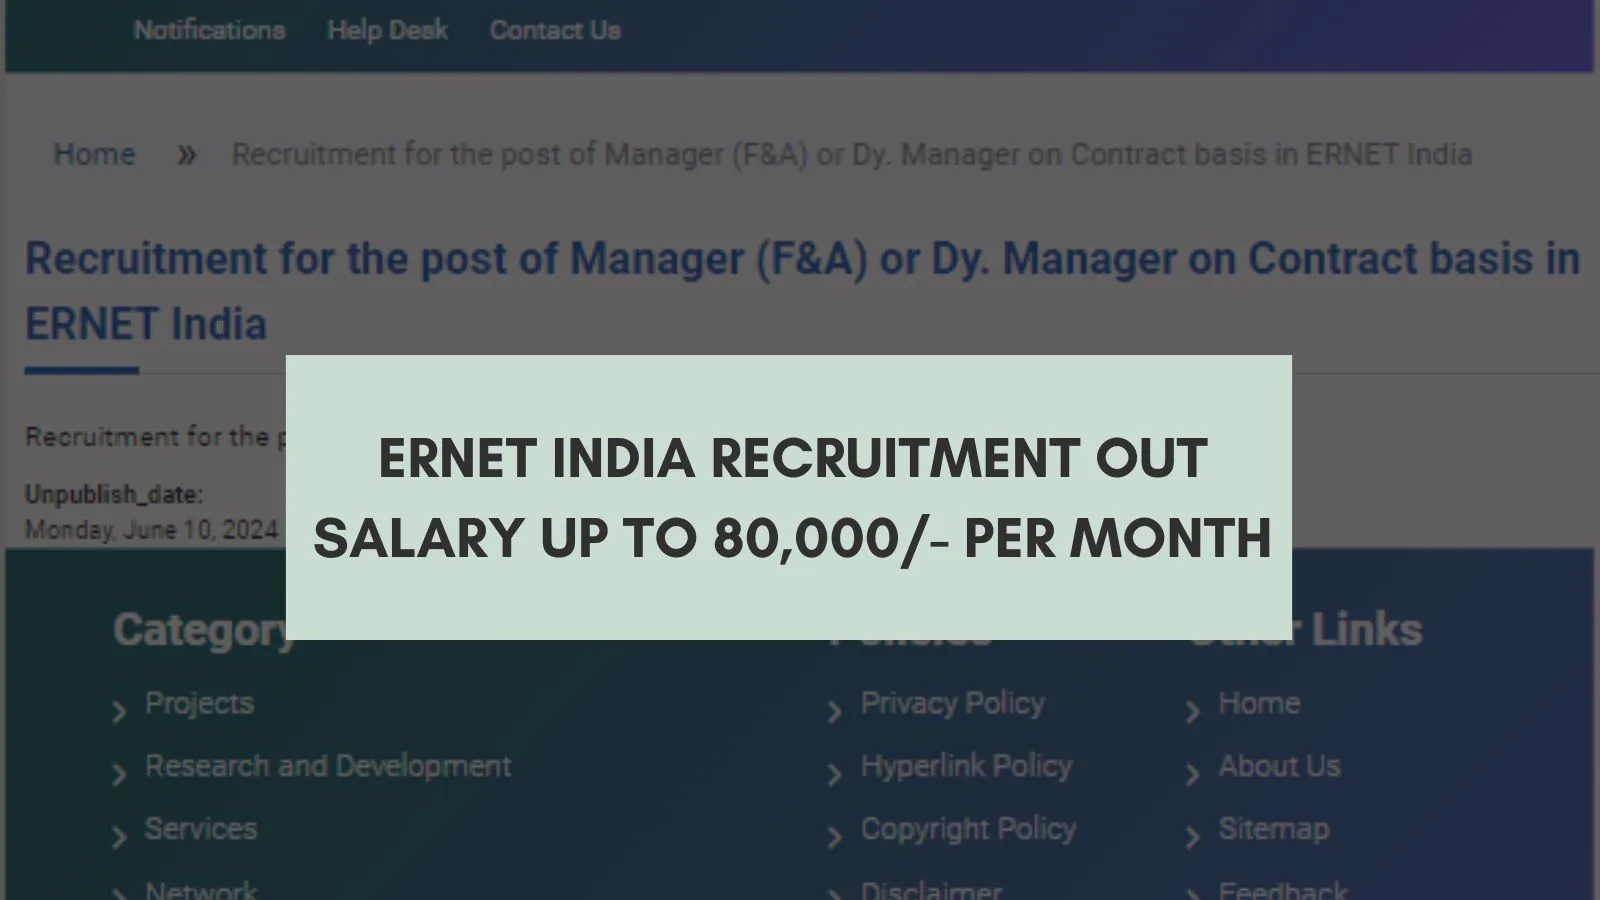 ERNET India Recruitment Out, Salary Up To 80,000/- Per Month